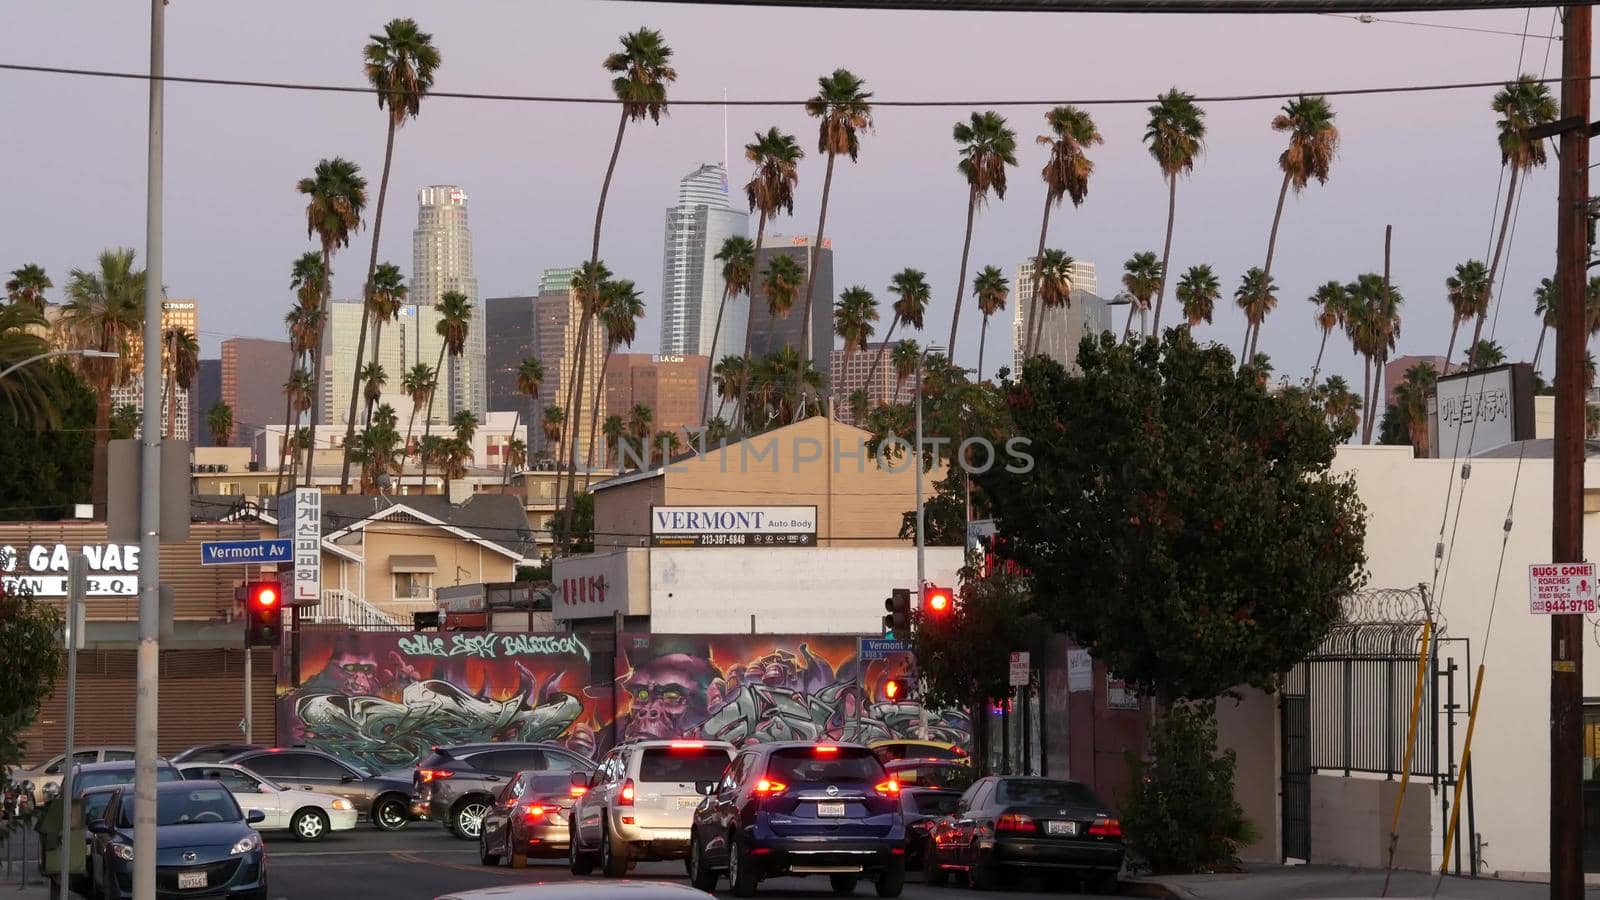 LOS ANGELES, CALIFORNIA, USA - 30 OCT 2019: Urban skyline and palms. LA city night aesthetic, graffiti painting on Vermont street. Highrise skyscrapers in downtown of metropolis. Road intersection.